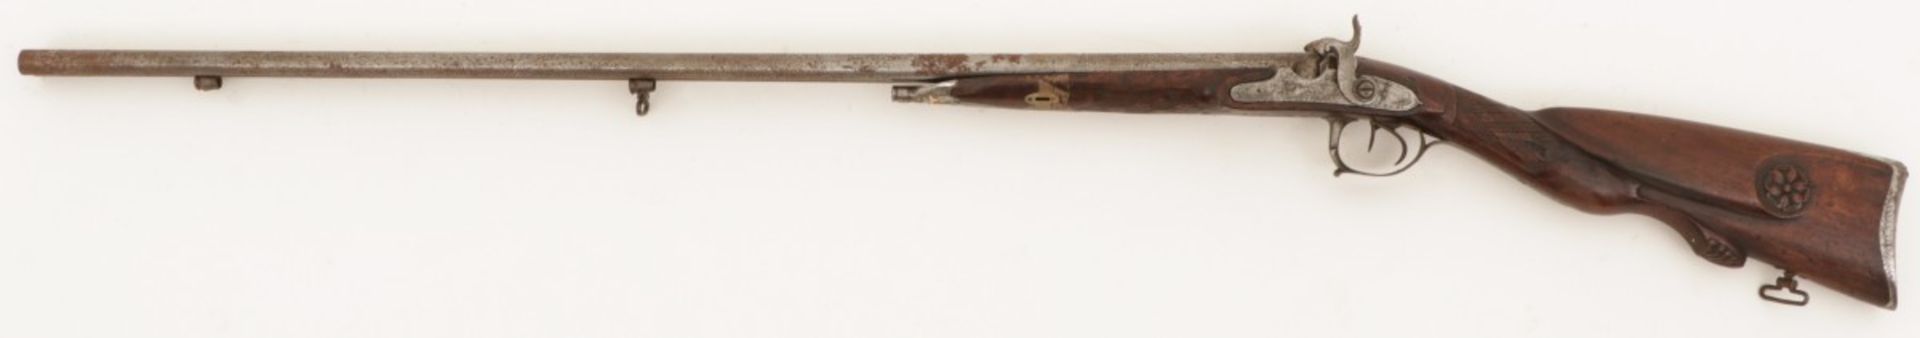 A double barrel percussion rifle, France, late 19th century.